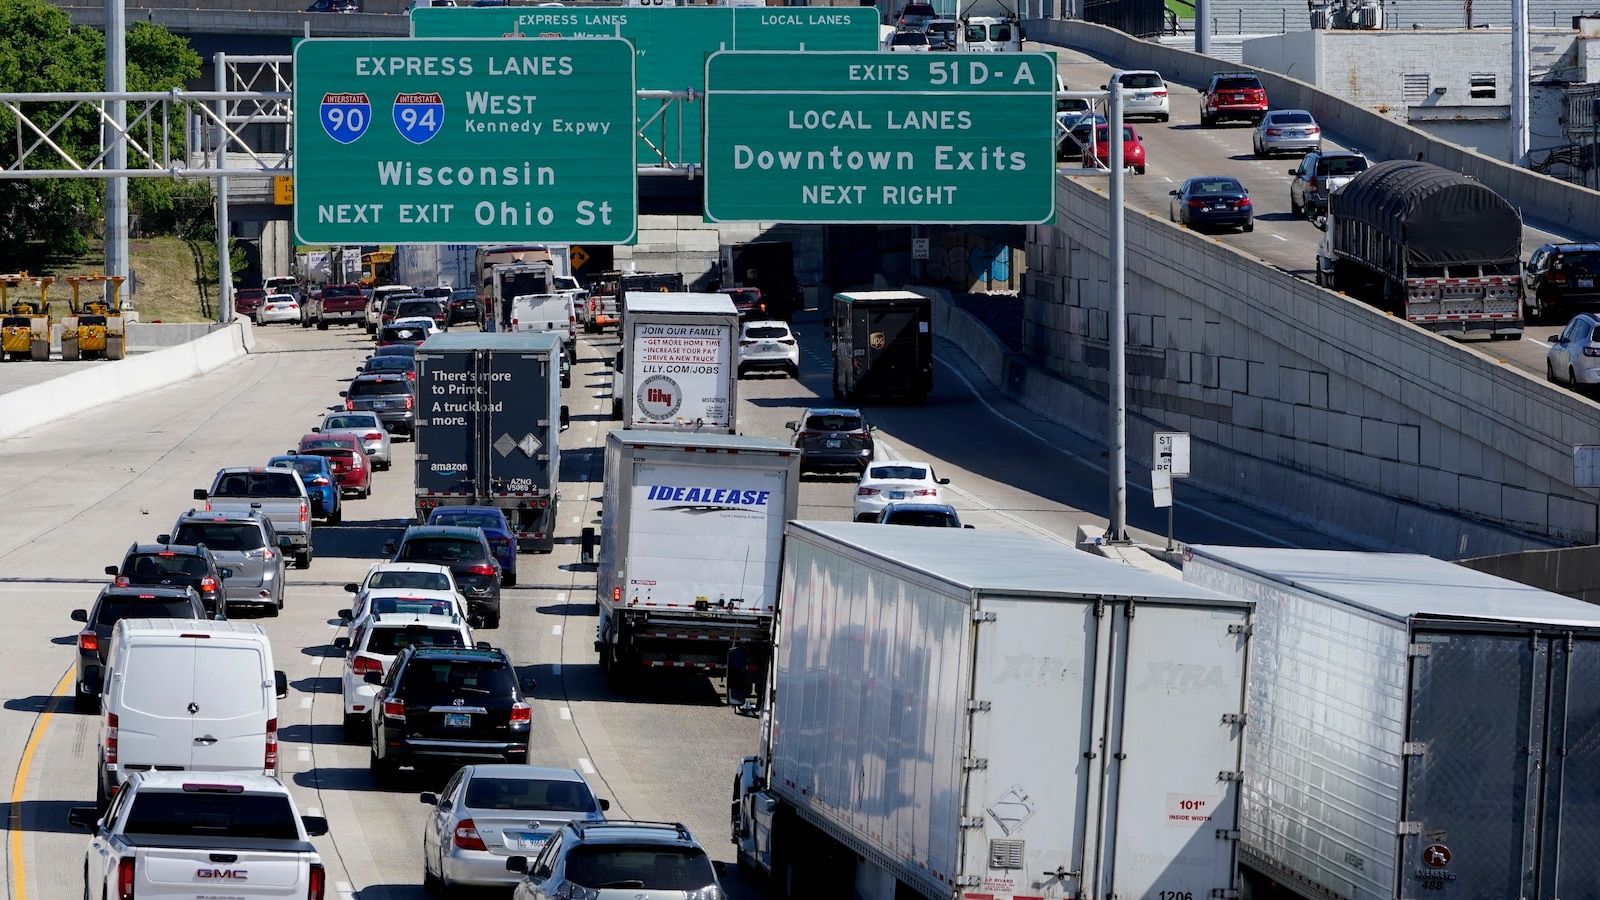 Remember last year's Memorial Day travel jams?  Chances are it will be much worse this year